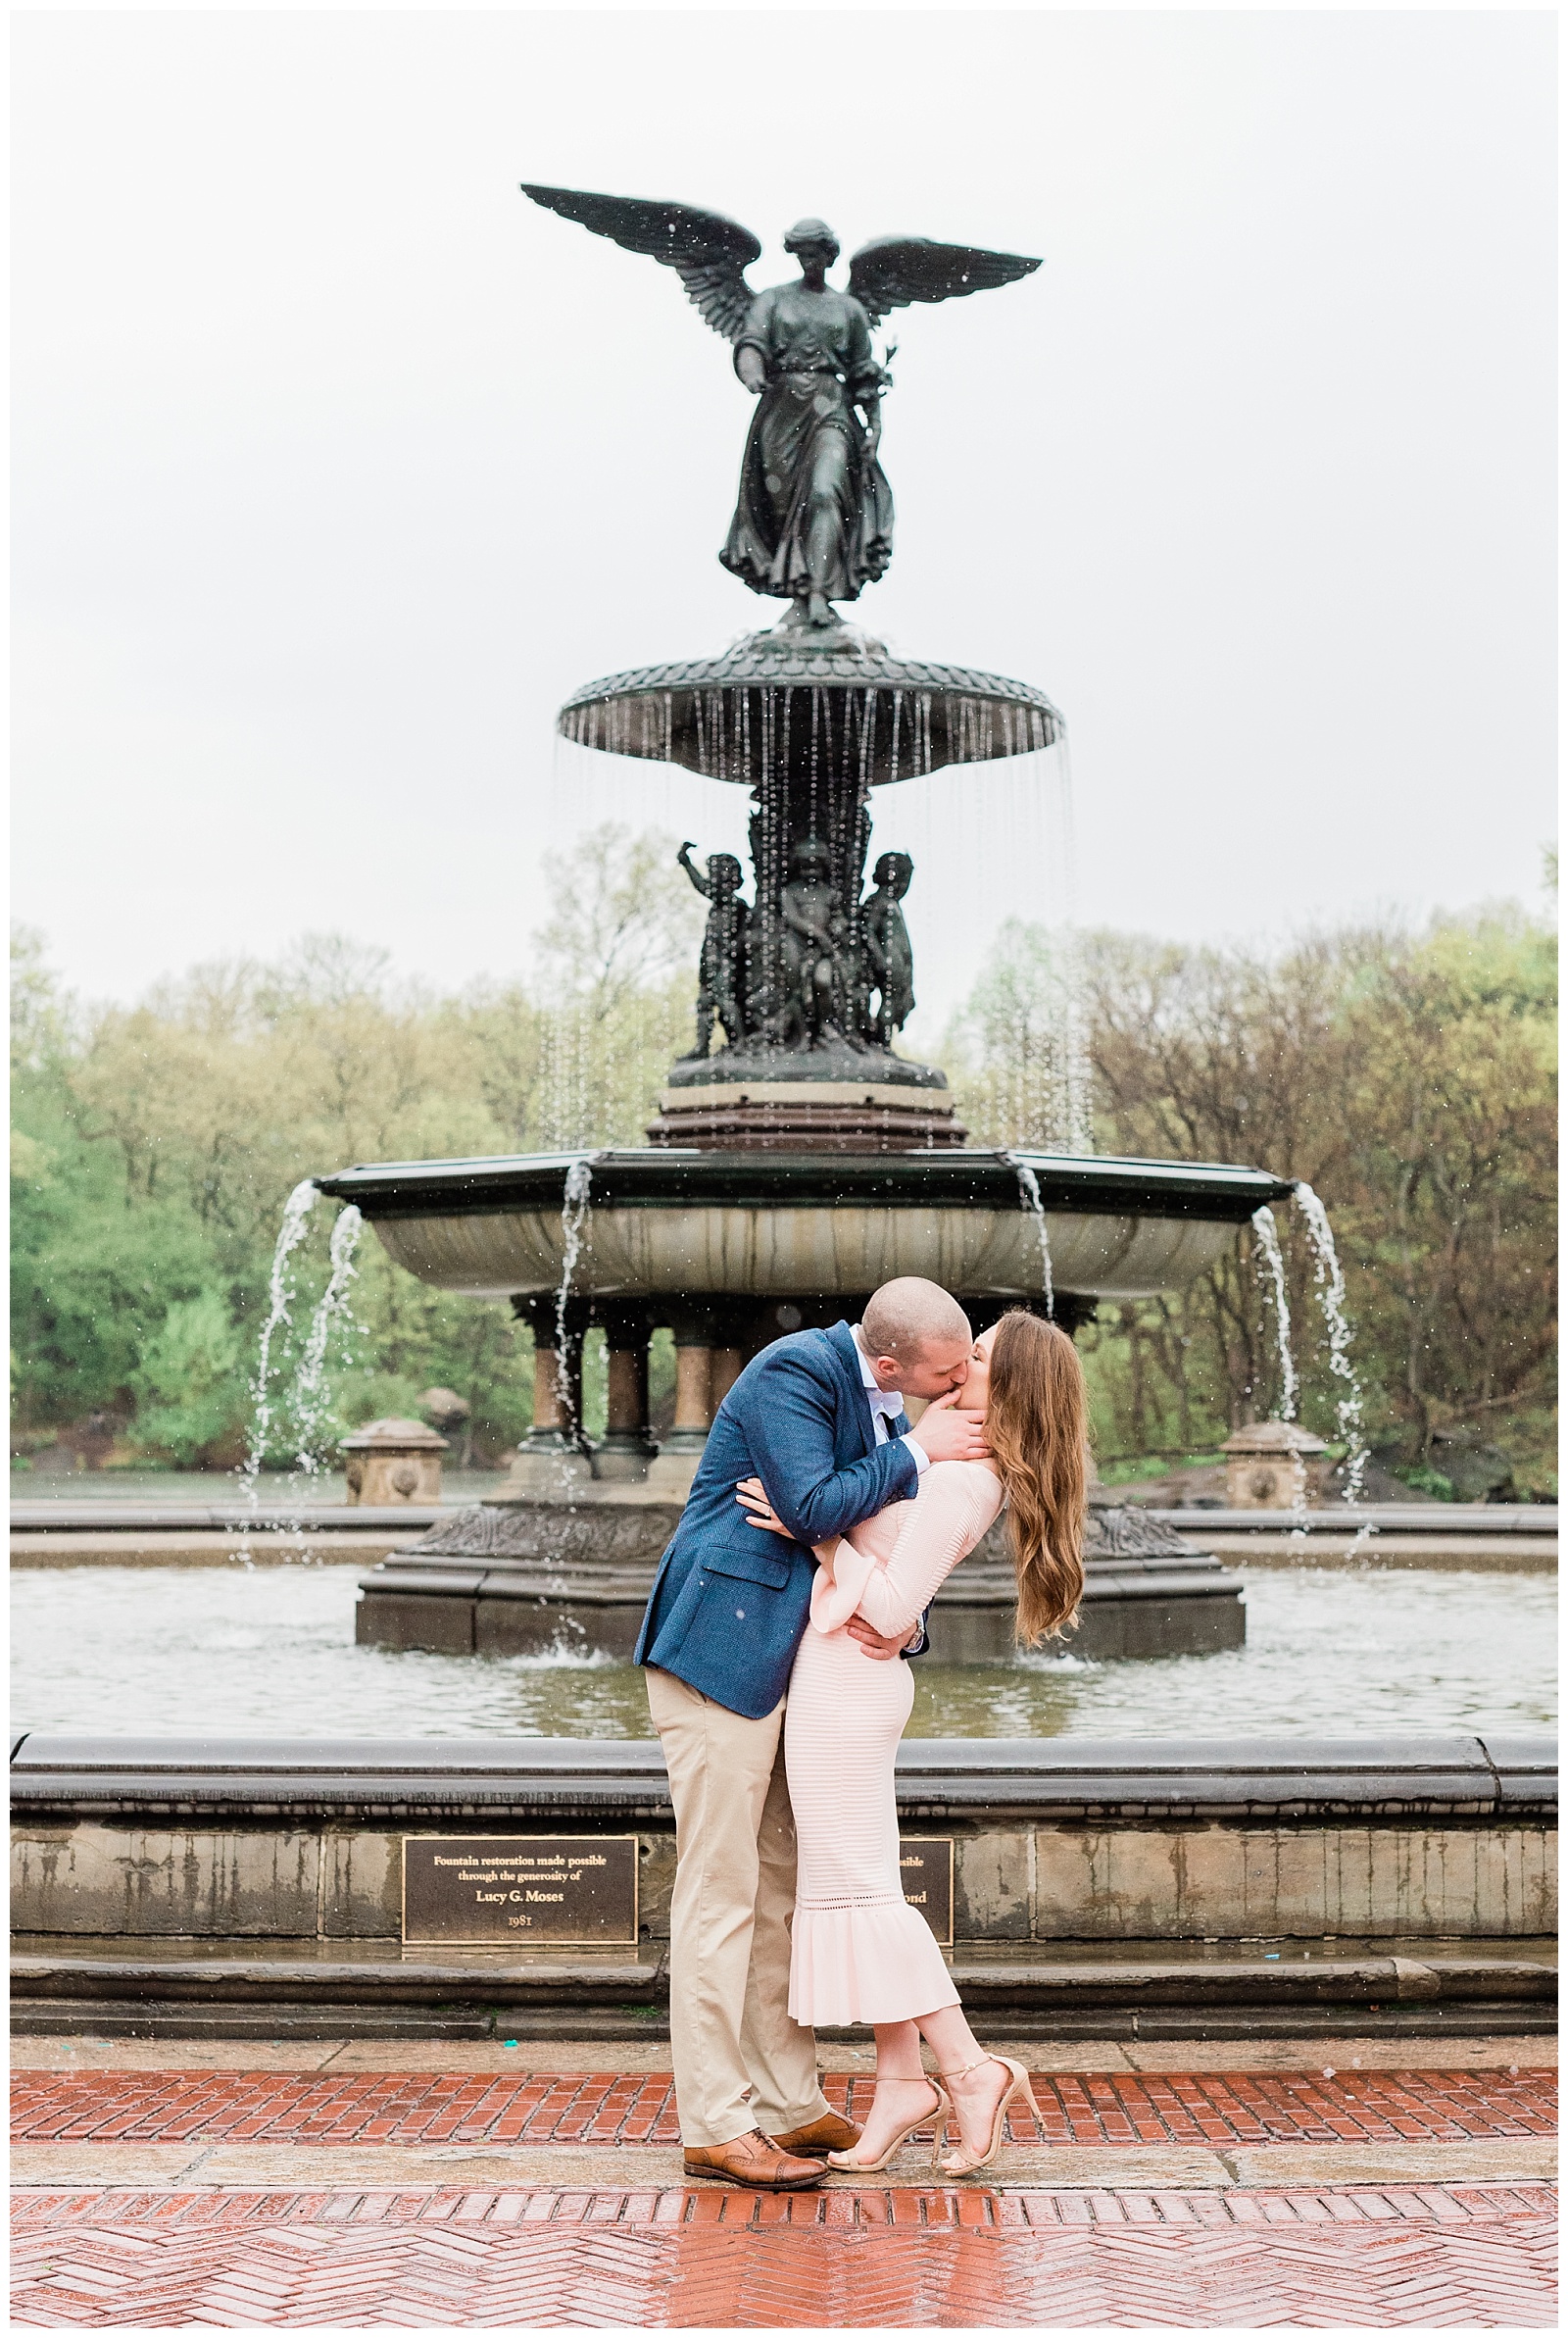 A man dips his fiance back for a kiss in the rain in front of Bethesda Fountain in Central Park, NYC.